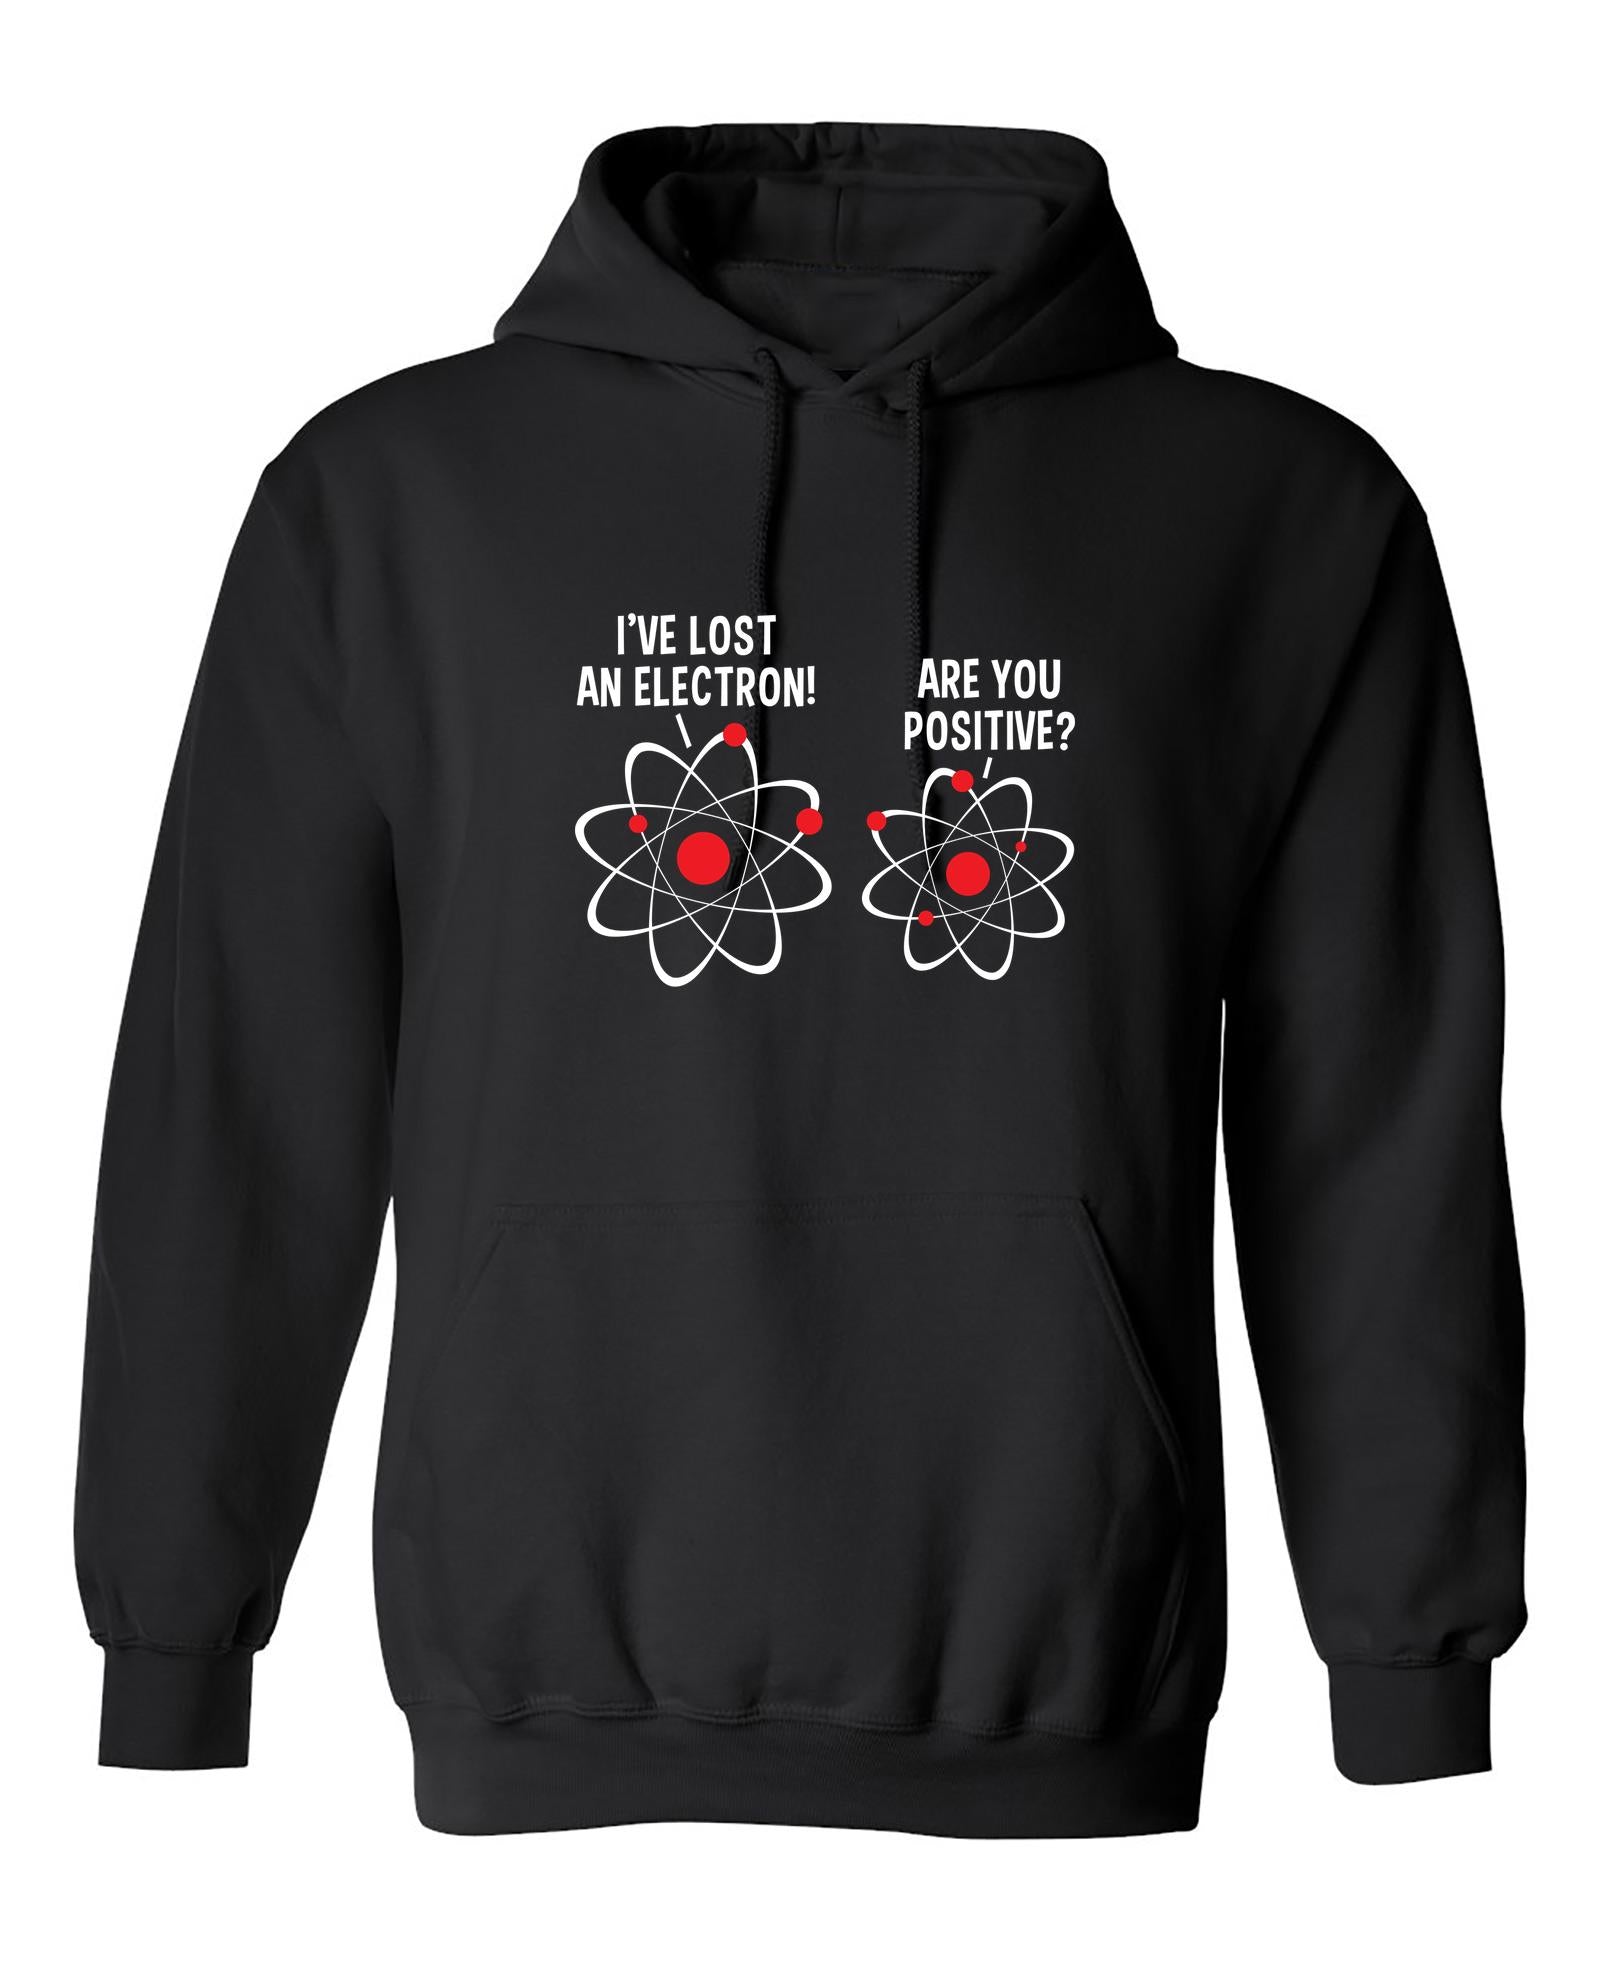 Funny T-Shirts design "I Lost An Electron Are You Positive"